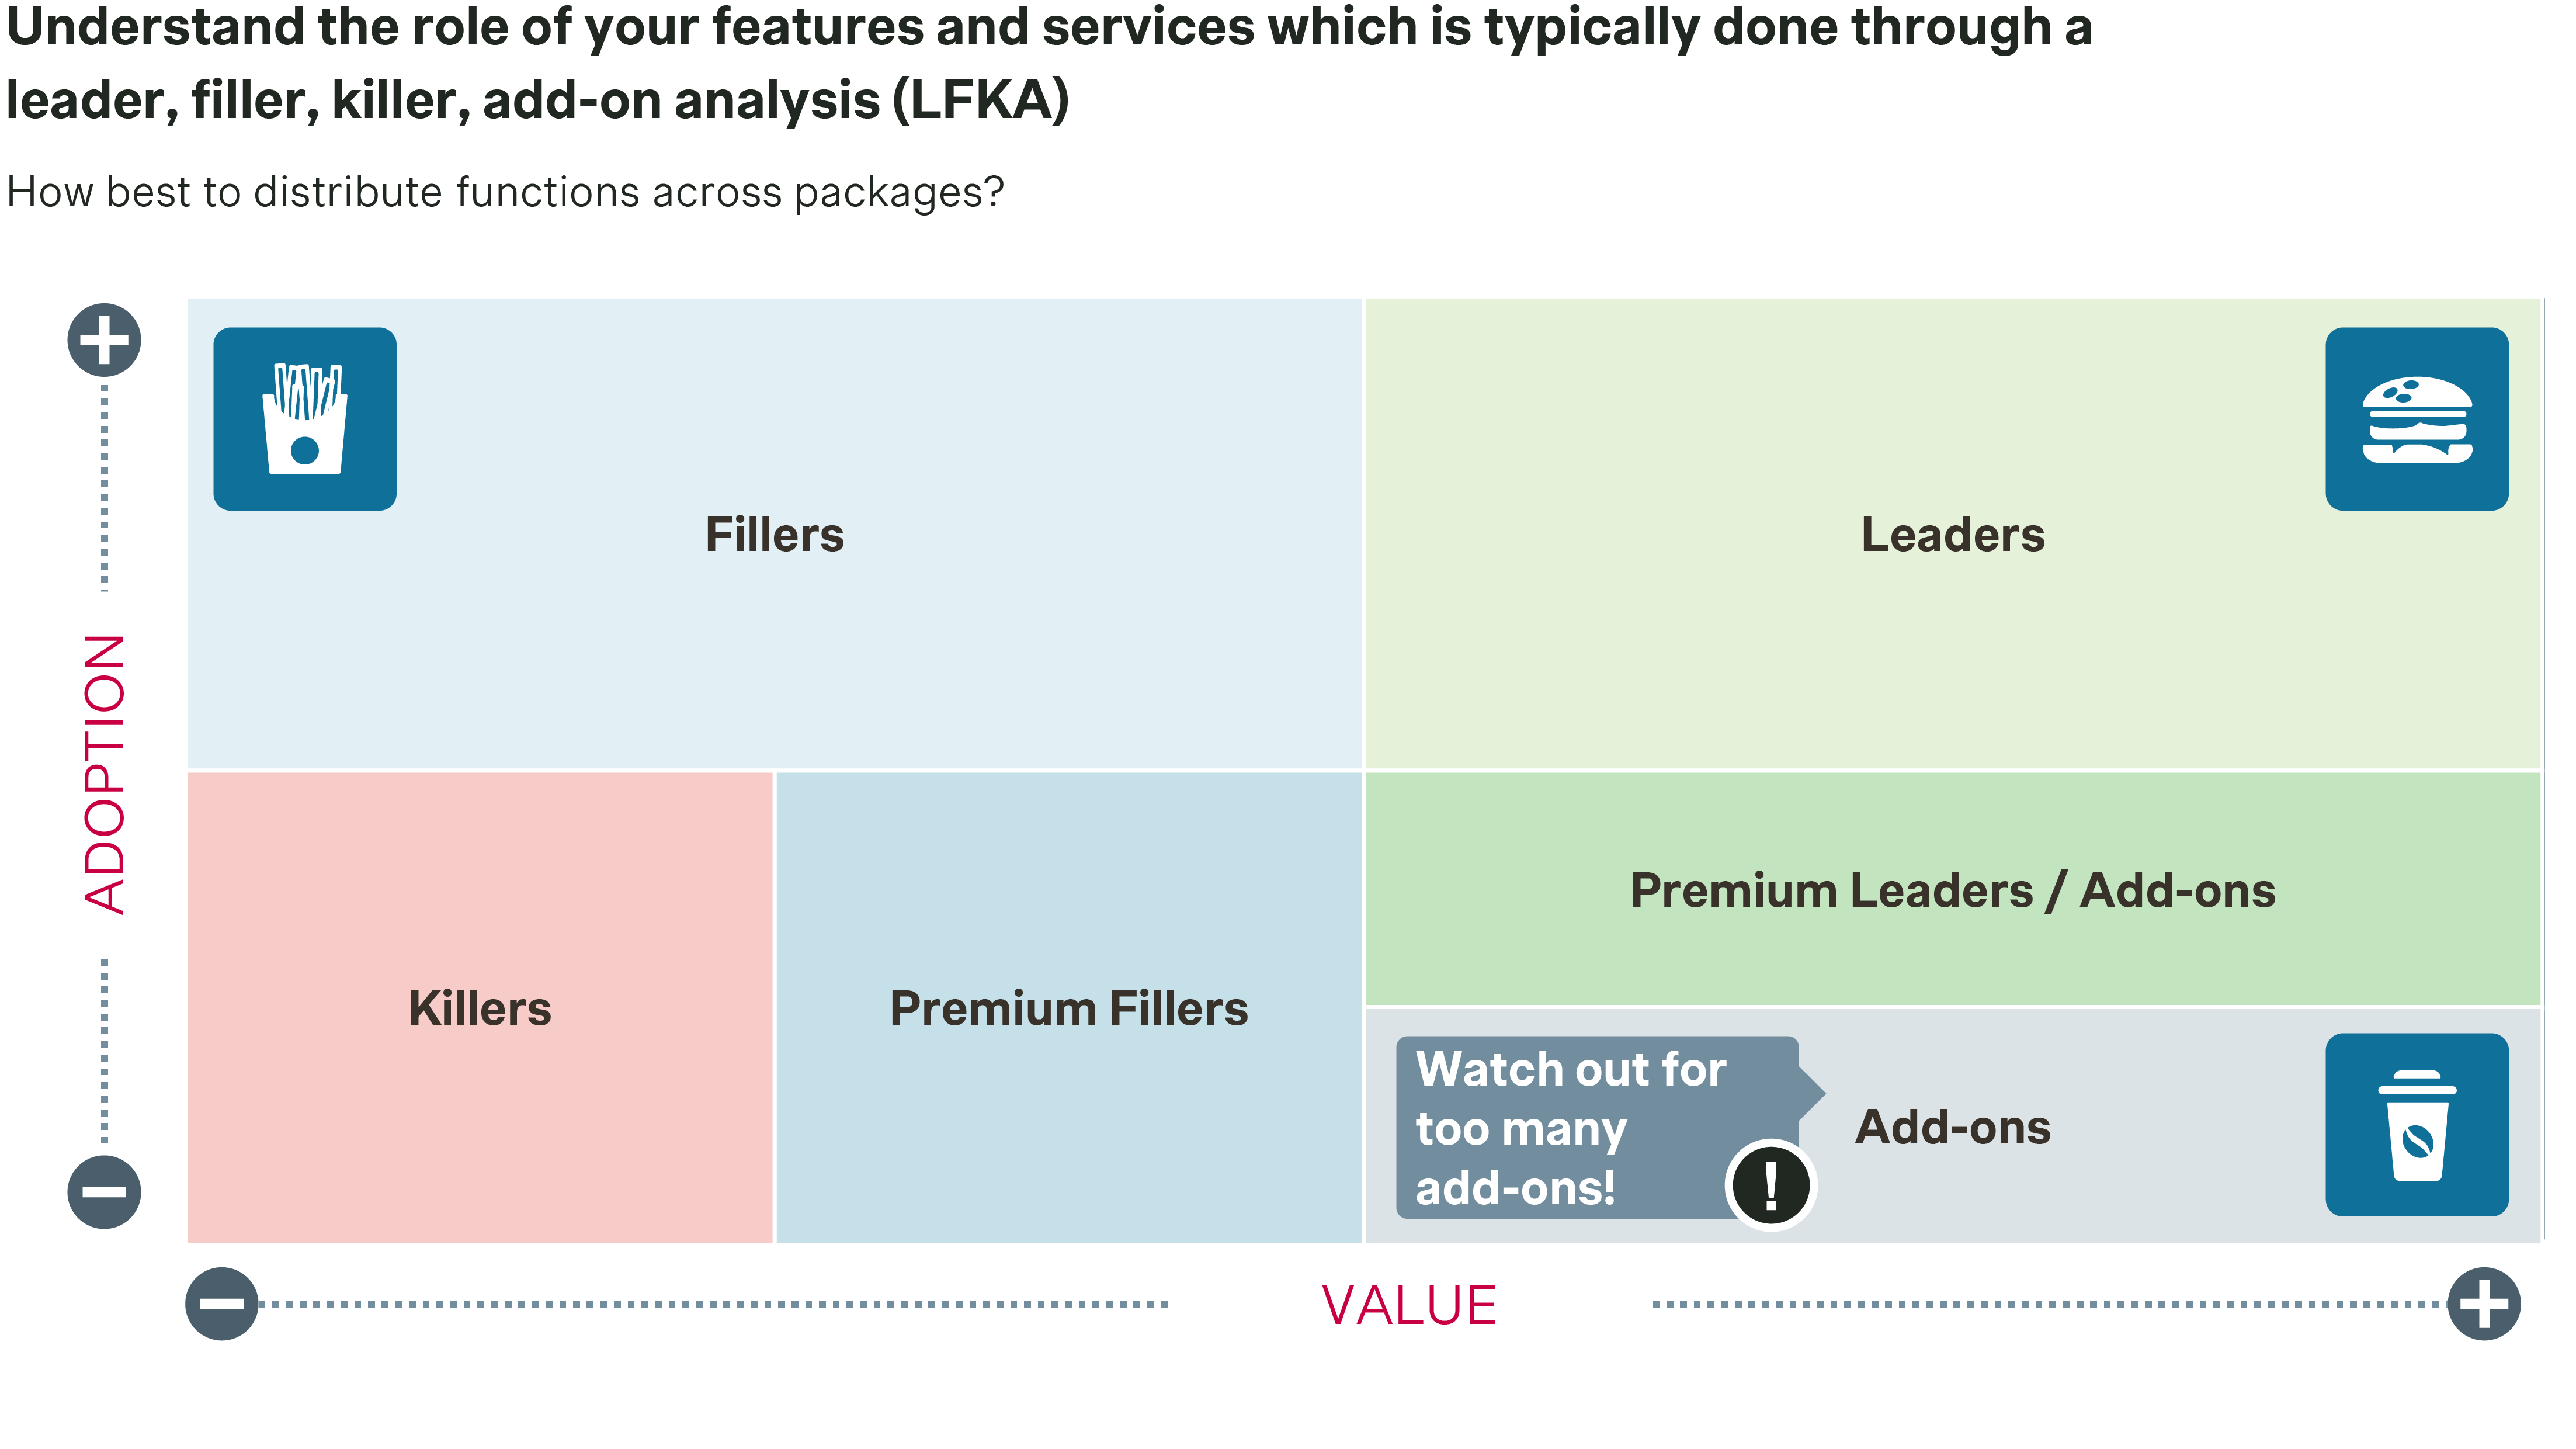 Understand the role of your features and services which is typically done through a leader, filler, killer, add-on analysis (LFKA).